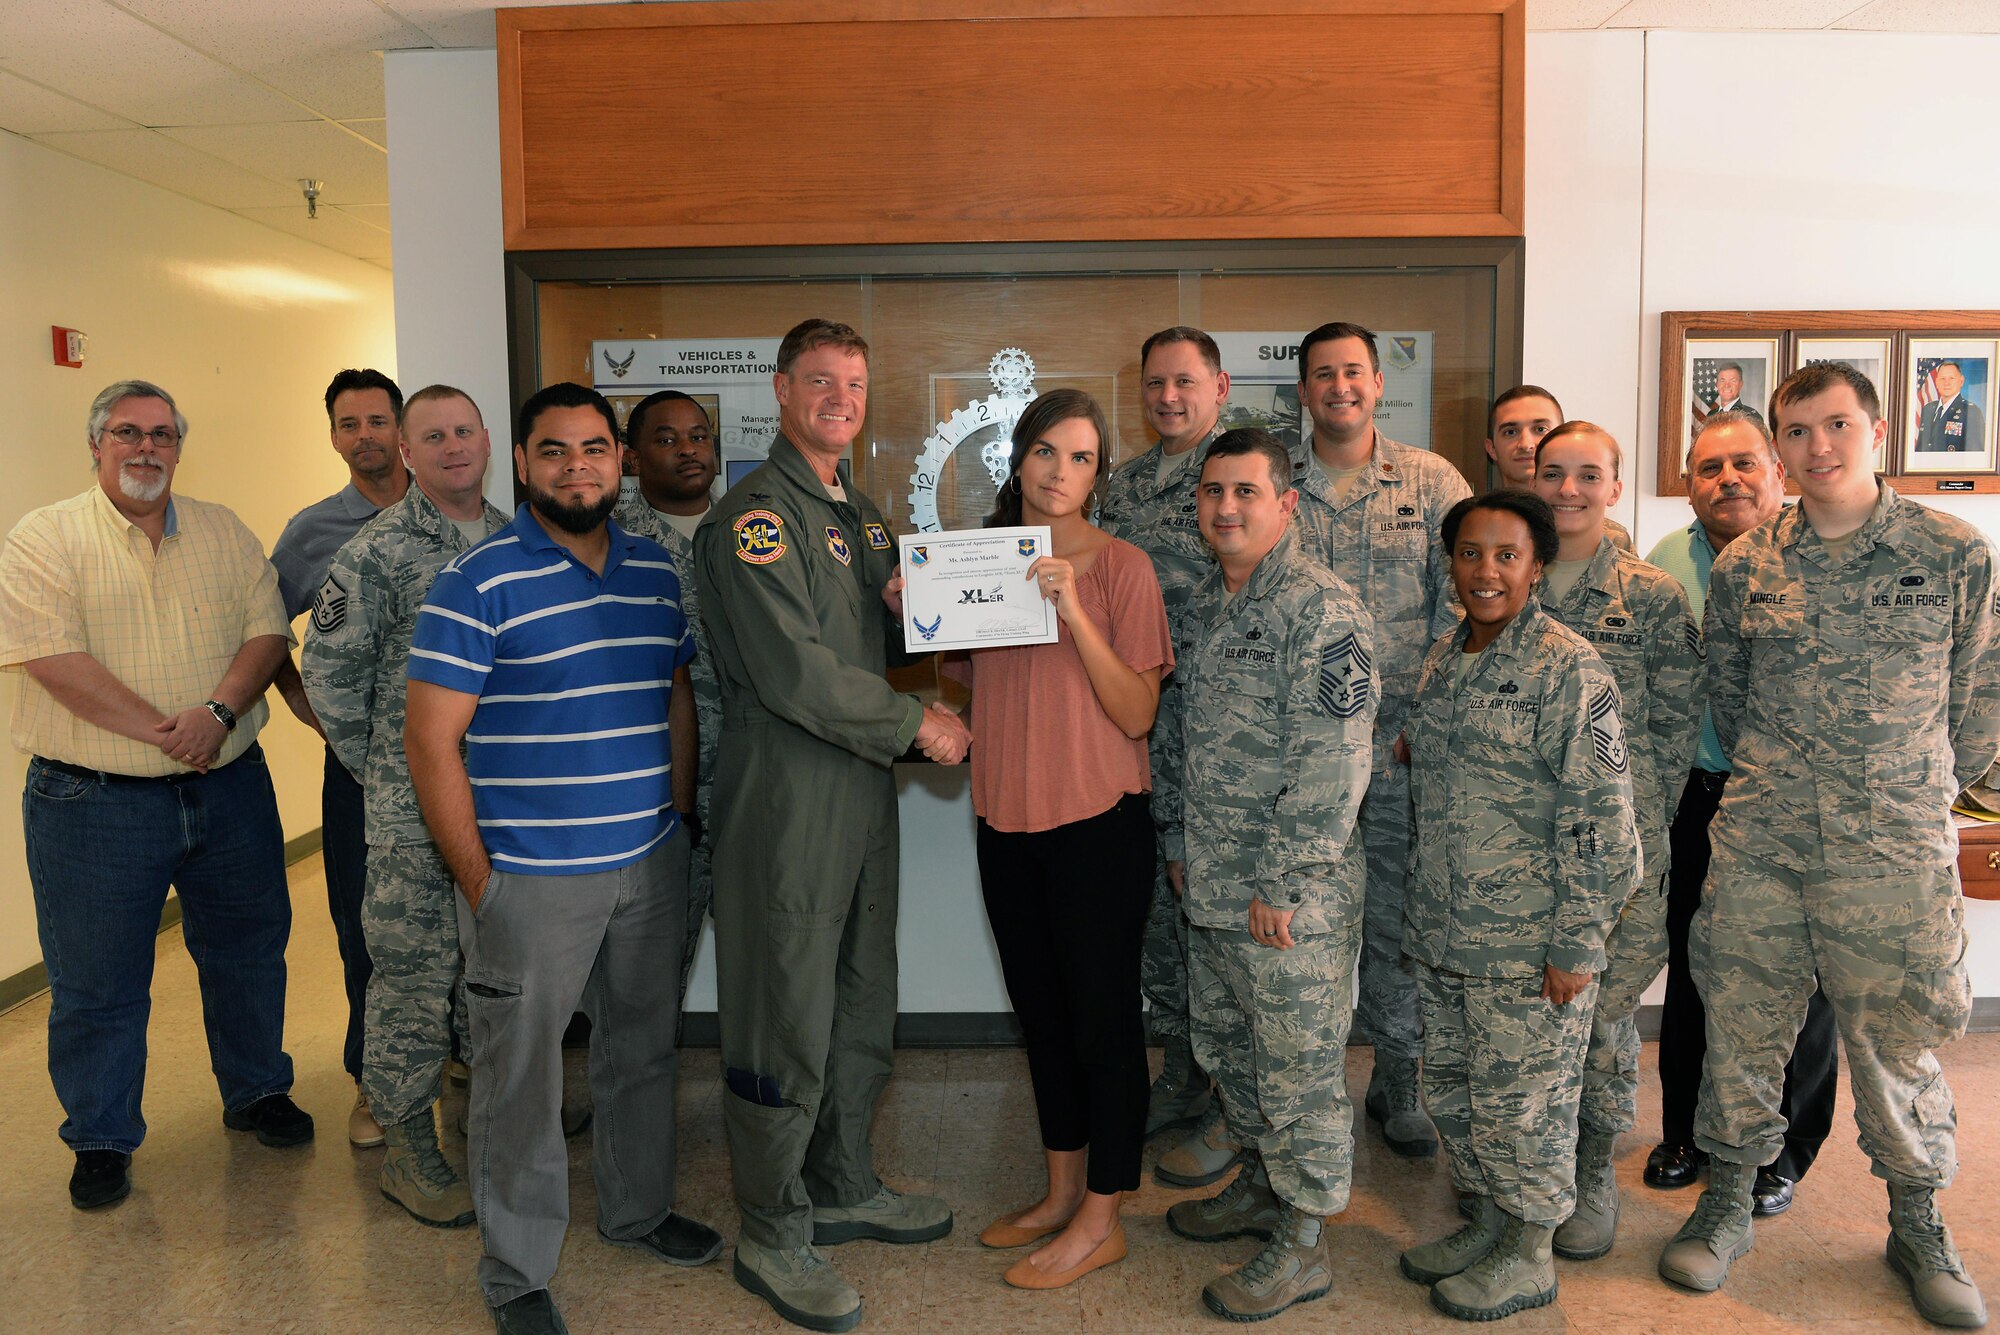 Ashlyn Marble (front), 47th Logistics Readiness Flight secretary office automation, accepts the “XLer of the Week” award from Col. Thomas Shank (front left), 47th Flying Training Wing commander, and Chief Master Sgt. George Richey (front right), 47th FTW command chief on Laughlin Air Force Base, Texas, Sept. 8, 2016. The XLer is a weekly award chosen by wing leadership and is presented to those who consistently make outstanding contributions to their unit and Laughlin. (U.S. Air Force photo/Airman 1st Class Benjamin N. Valmoja)